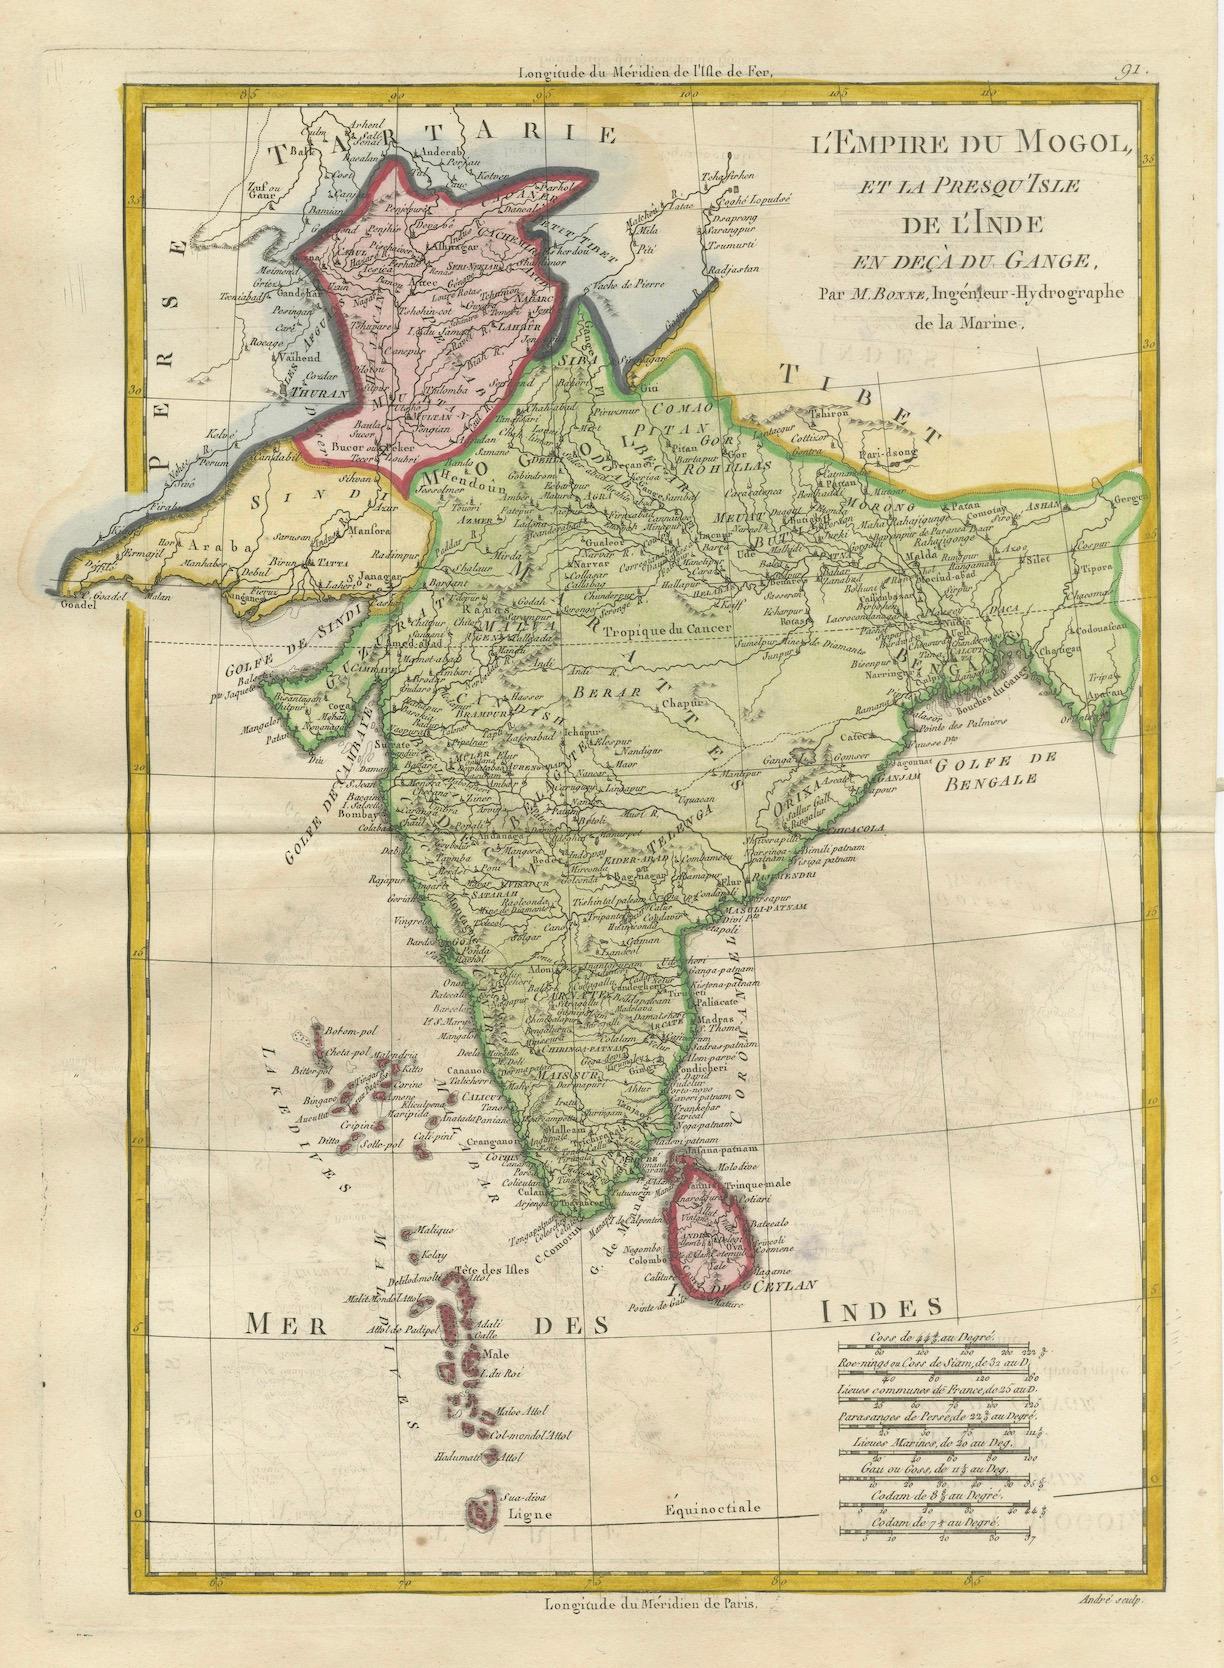 Old Map of The Mughal Empire and the Indian Peninsula South of the Ganges, 1787 For Sale 1